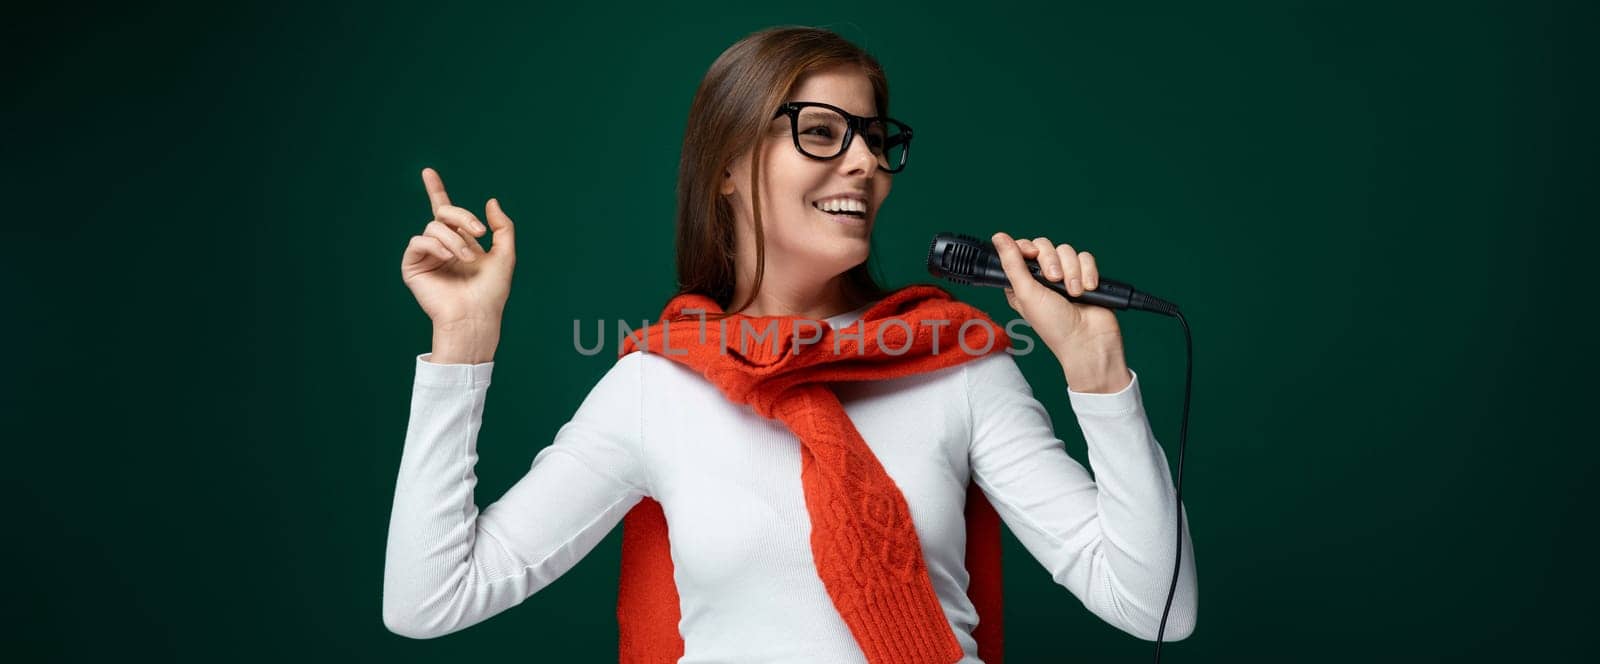 Young woman singer holding a microphone and singing a song by TRMK